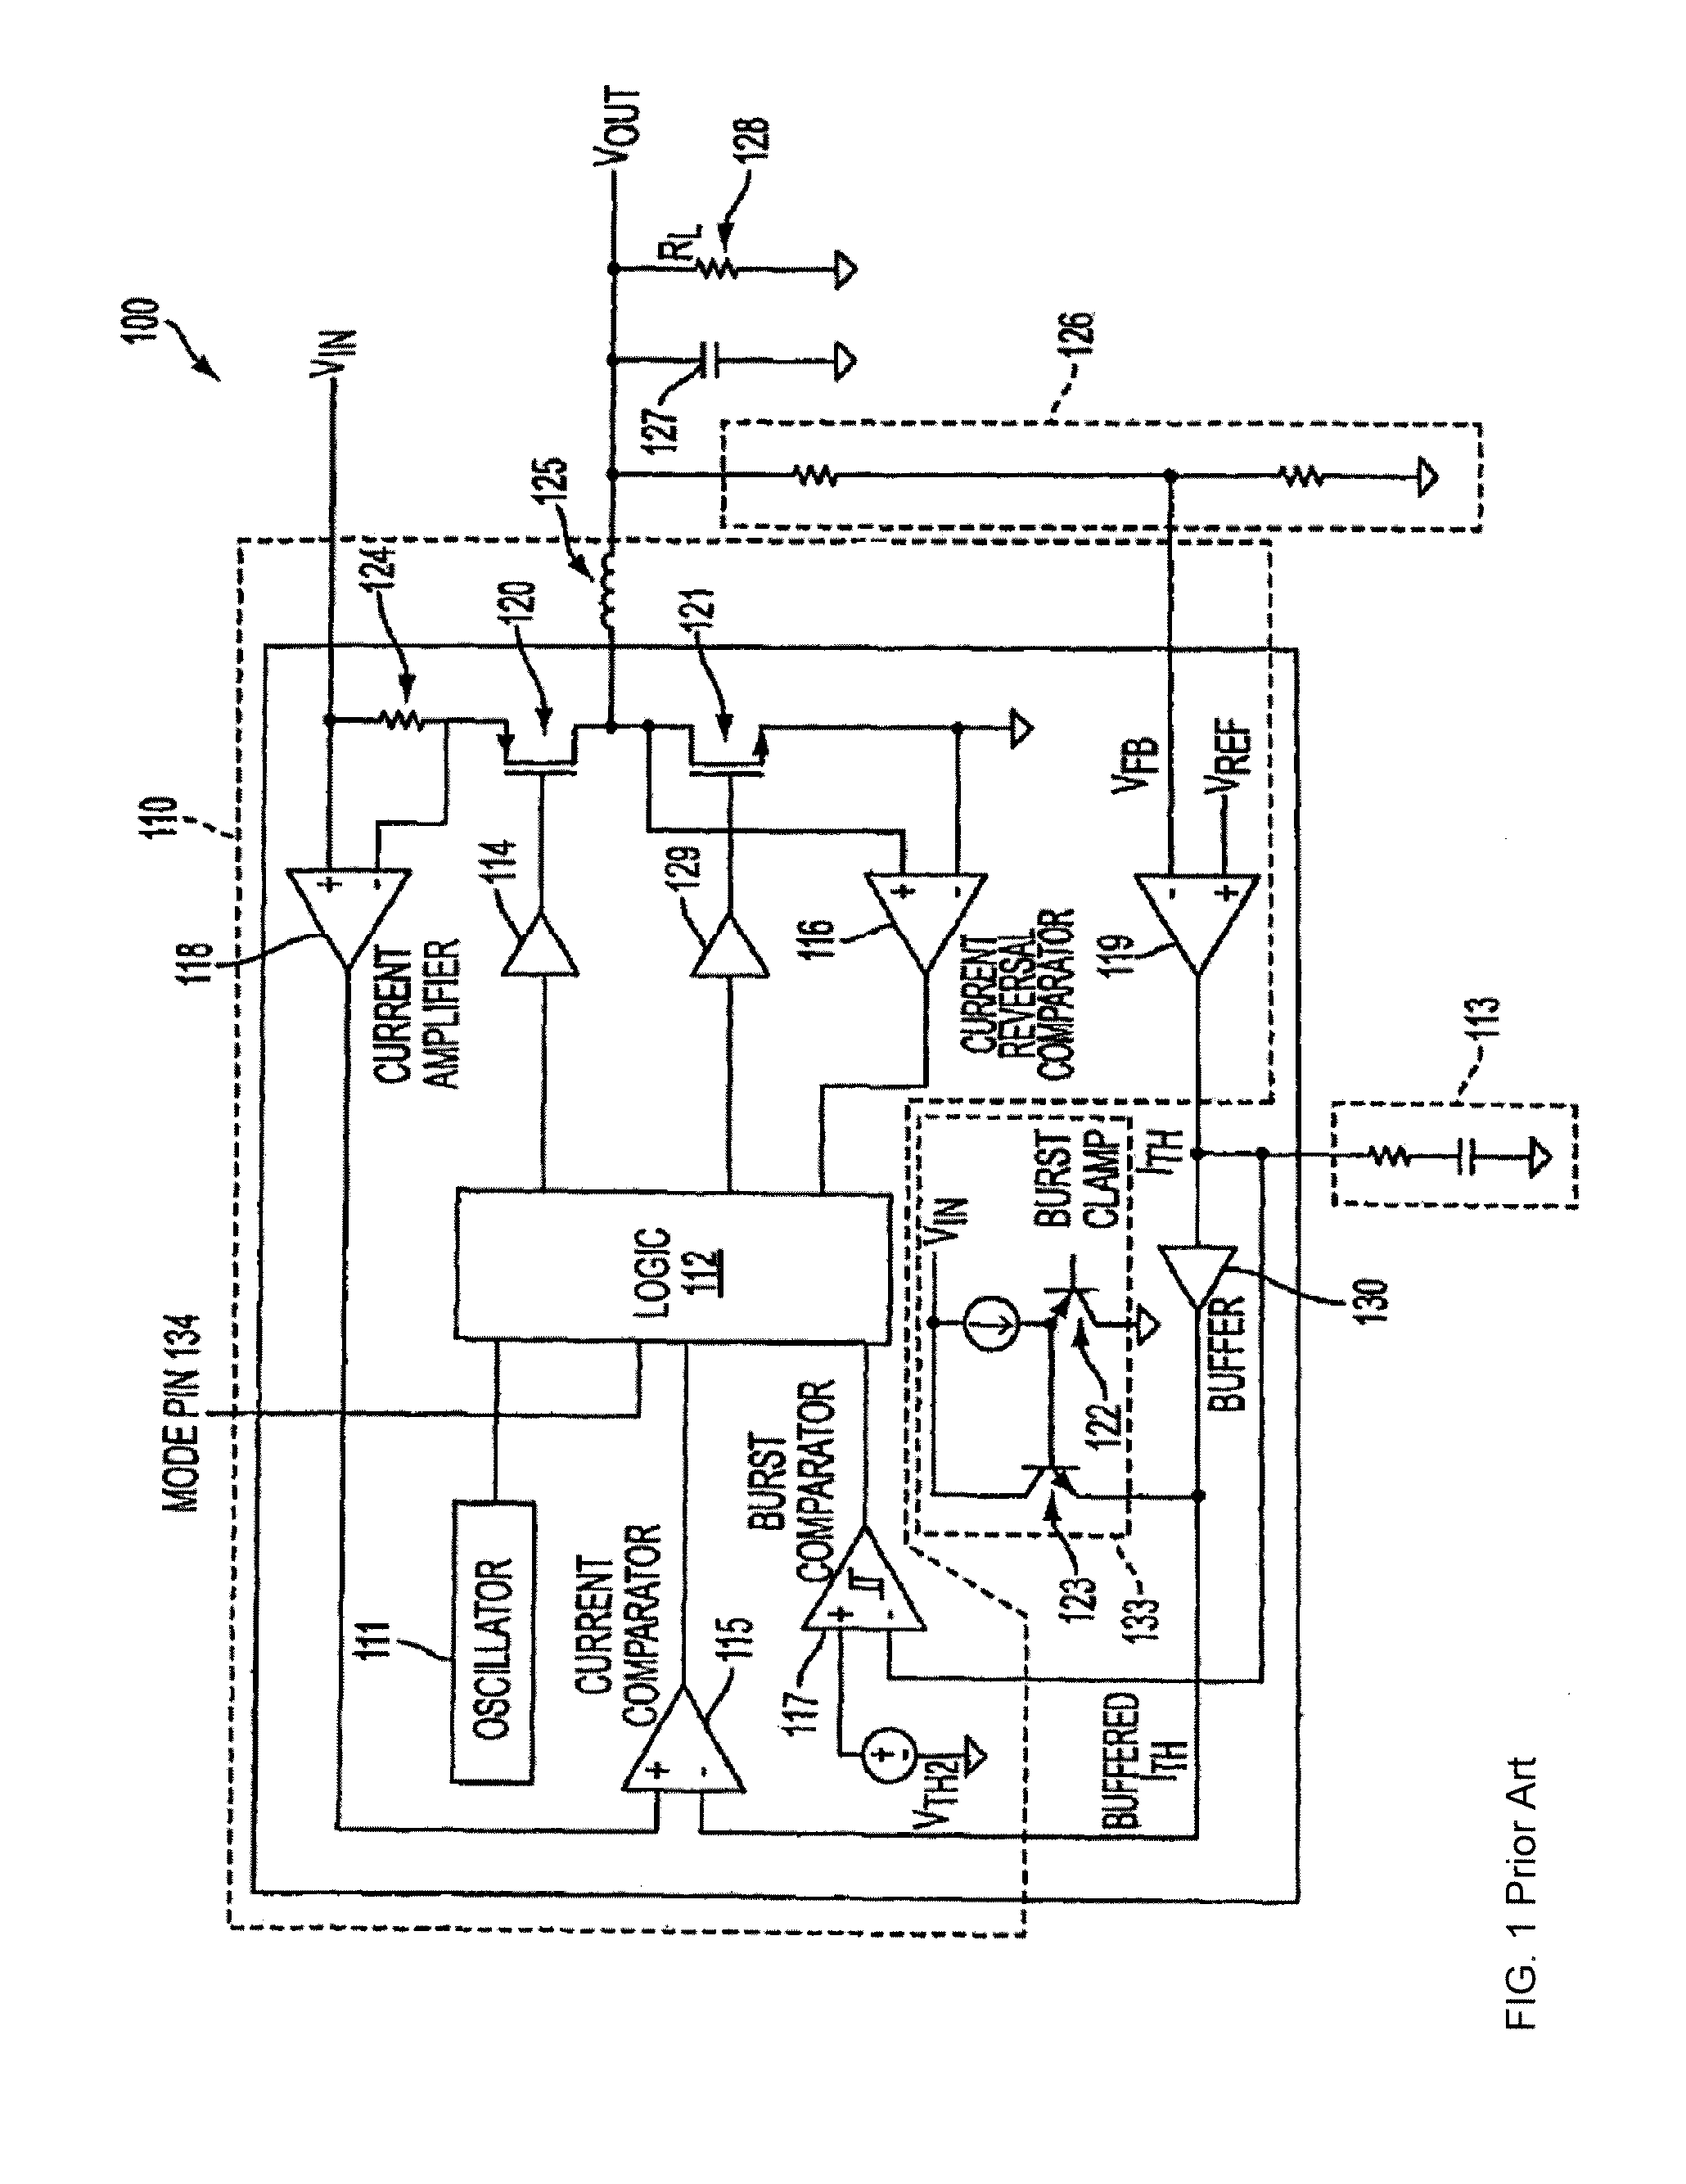 System and method for input voltage regulation of switch mode supplies implementing burst mode operation